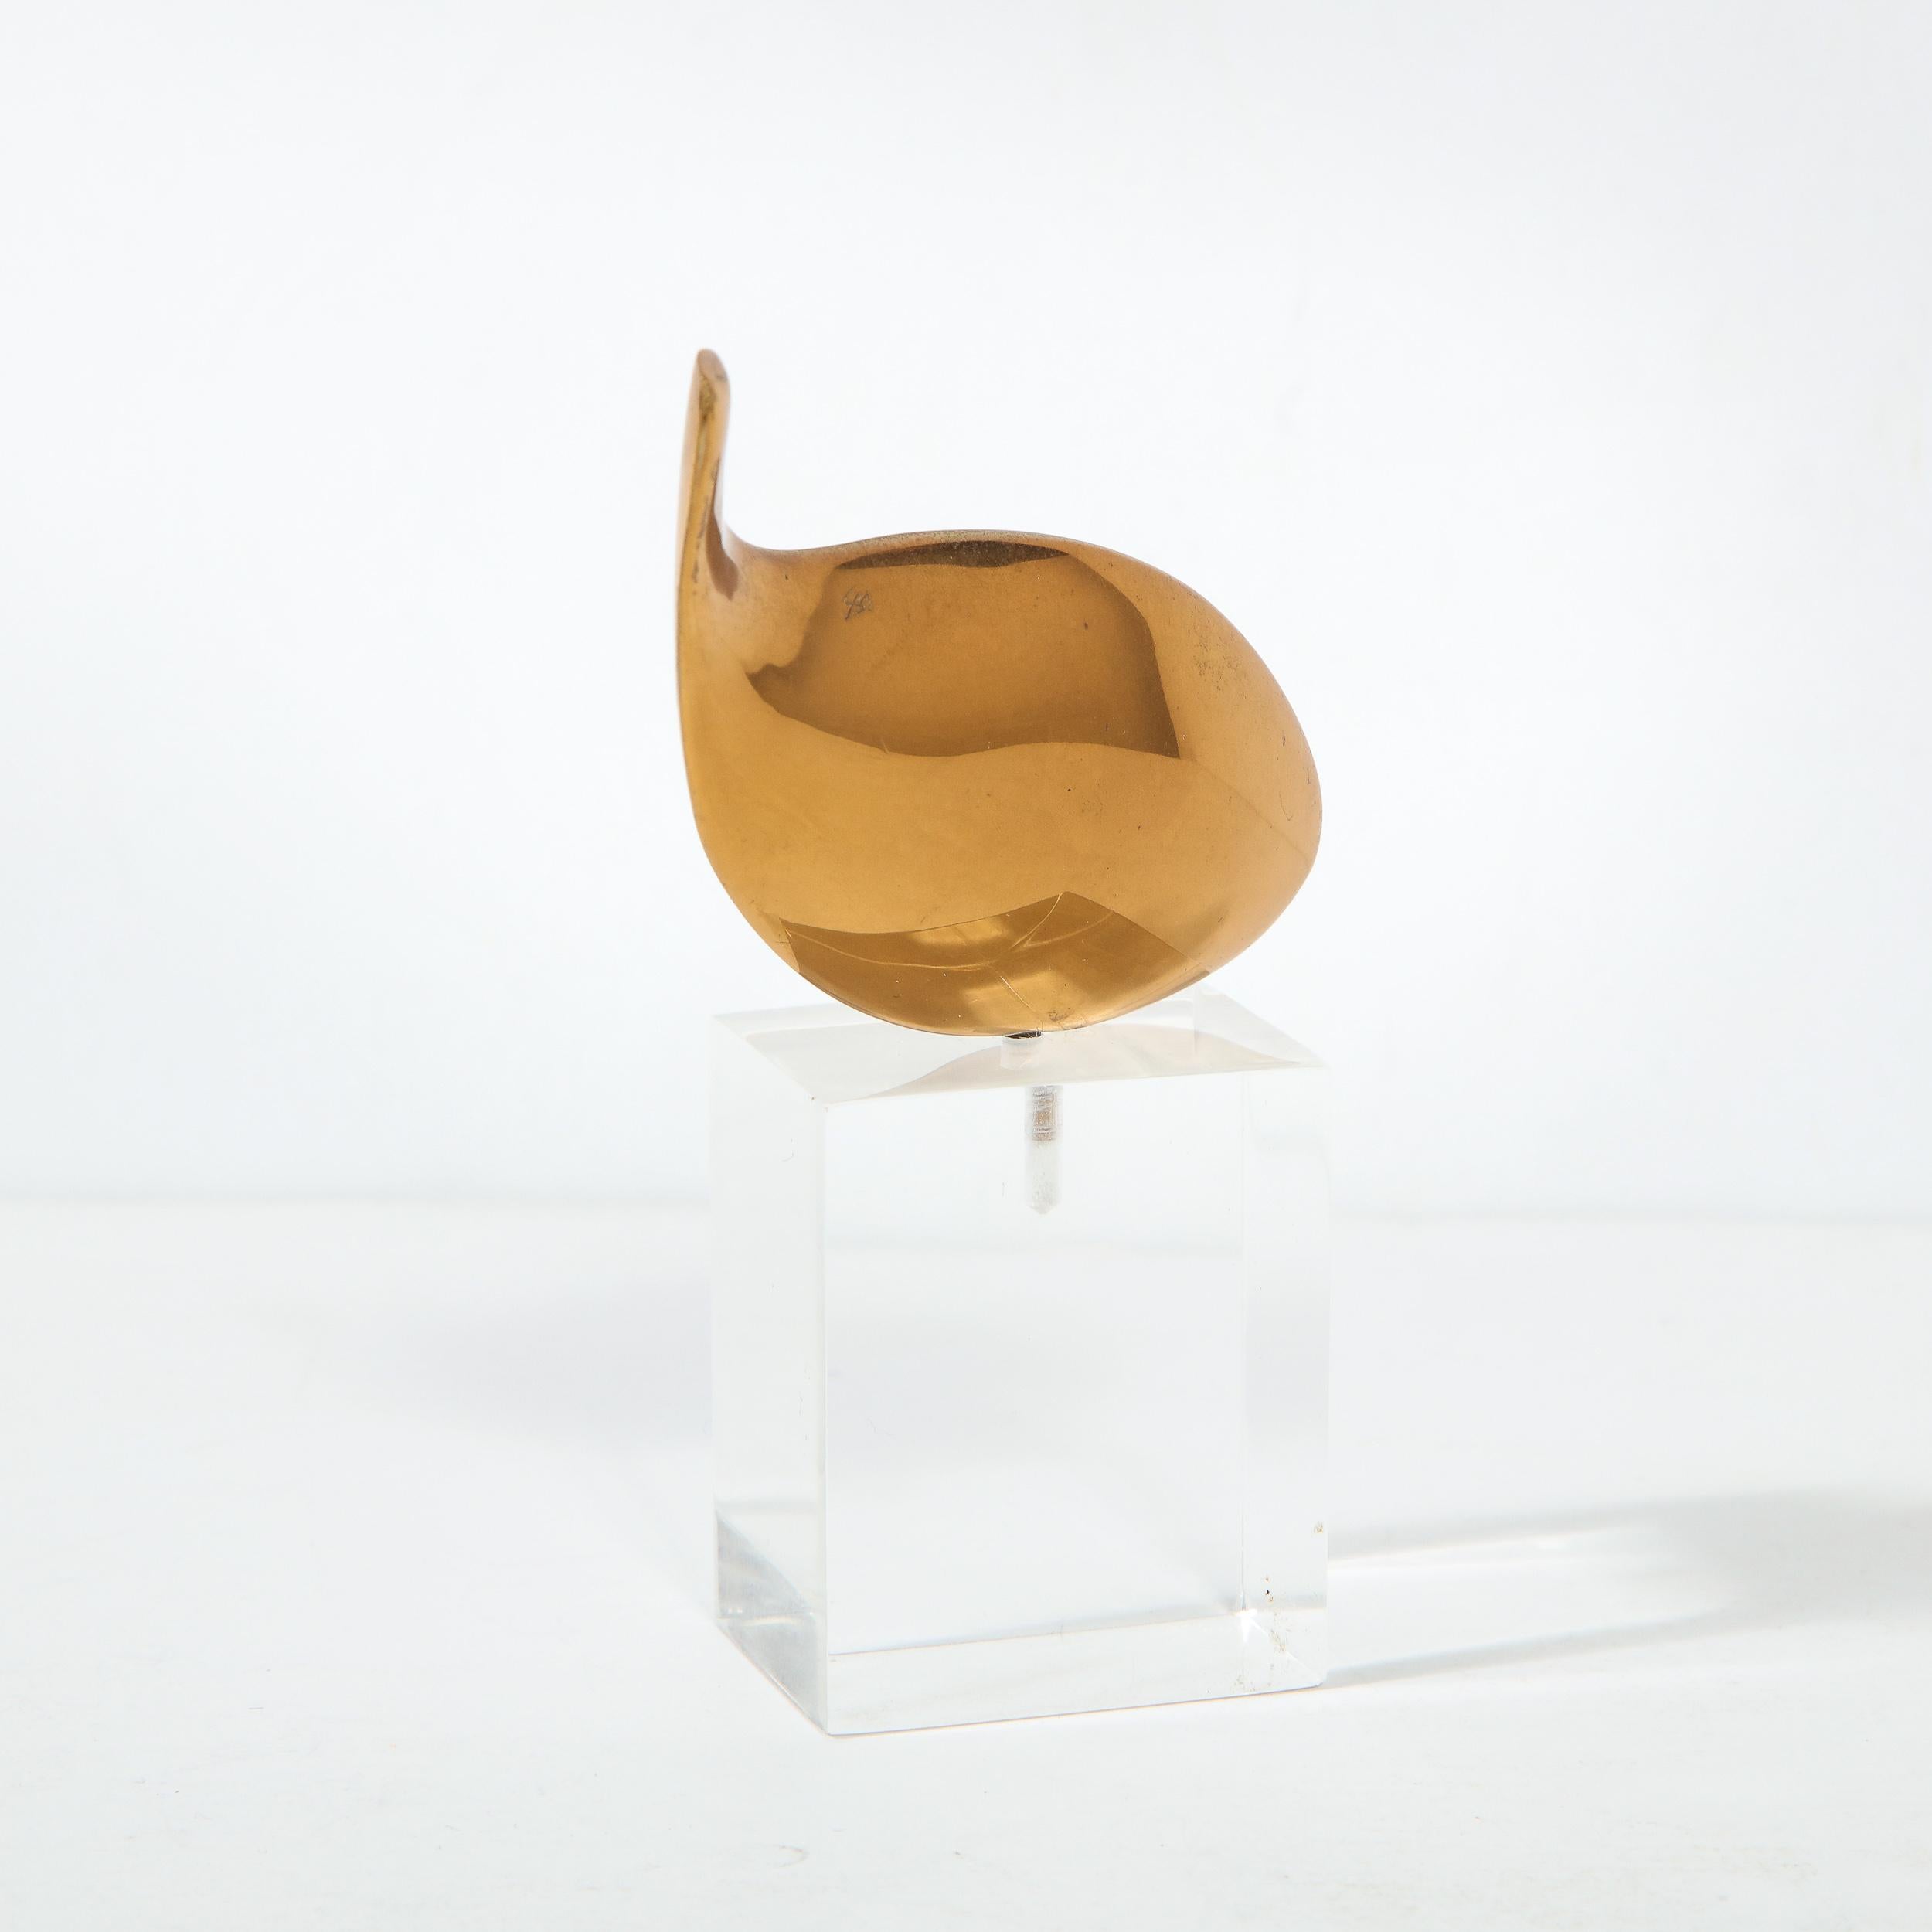 This stunning and sophisticated Mid Century Modern sculpture was realized in the United States circa 1960. It features an amorphic form- an elongated ovoid with a tapered tail resembling an abstracted fish- presented on a volumetric rectangular